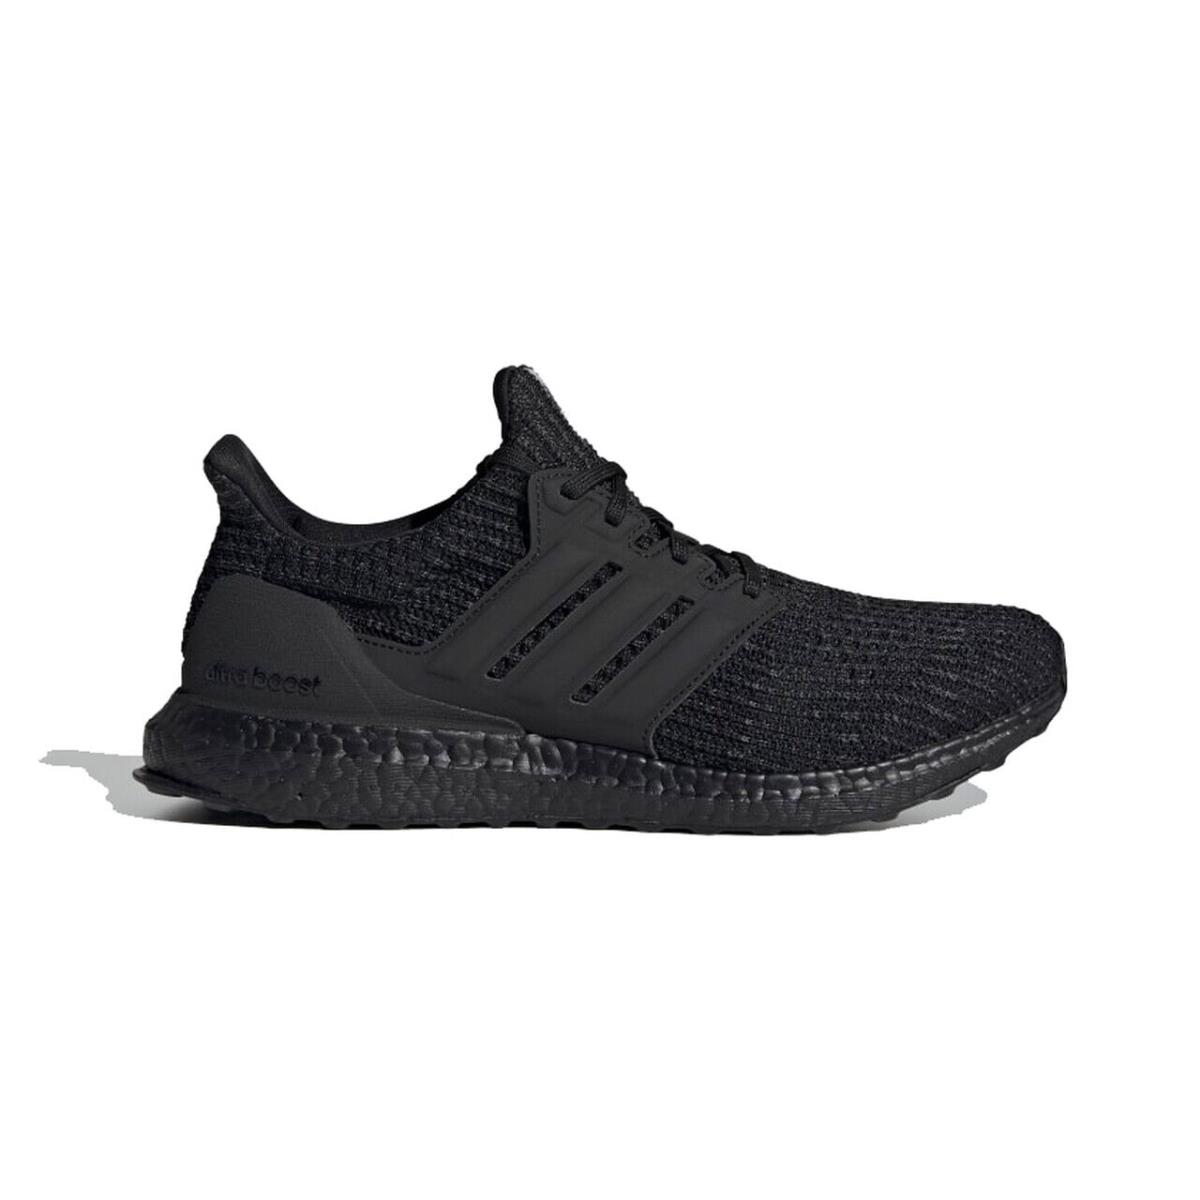 Adidas FY9121 Men`s Running Ultraboost 4.0 Dna Shoes Black/core Black/active Red - Black/Core Black/Active Red